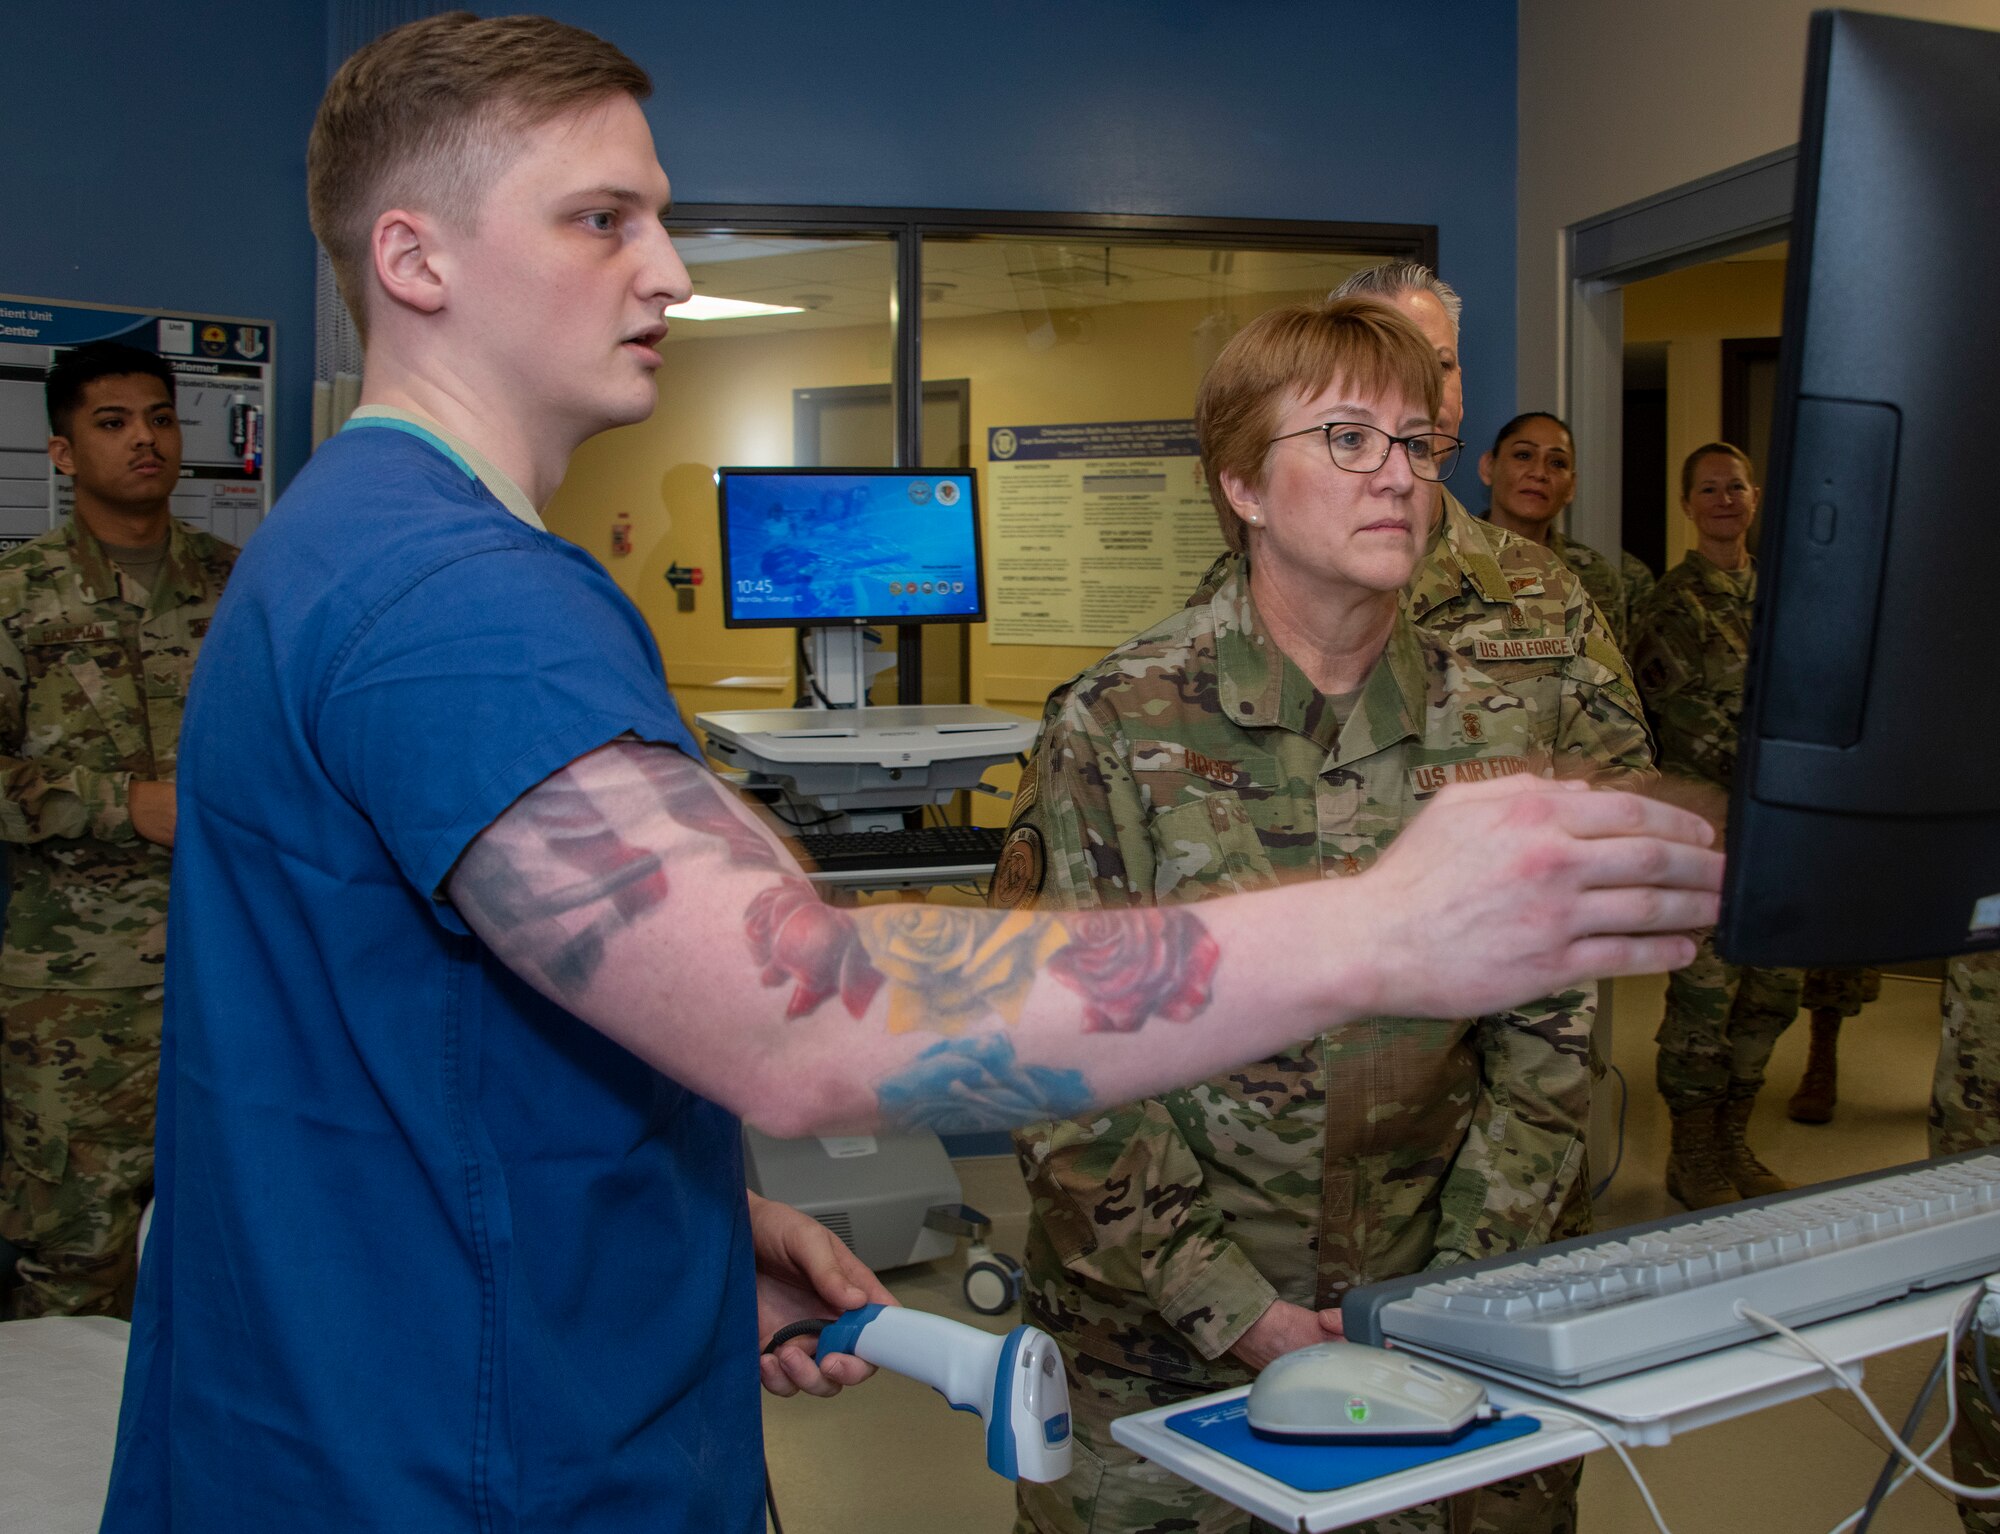 U.S. Air Force Airman 1st Class Trystan Self, left, 60th Inpatient Squadron critical care technician, demonstrates new technology on how information is recorded as Lt. Gen. Dorothy Hogg, Air Force Surgeon General, right, looks on during a tour through the 60th IPTC clinic, David Grant USAF Medical Center at Travis Air Force Base, California, Feb. 10, 2020. Hogg visited with 60th Medical Group Airmen and recognized the positive impact they have on their community through their innovative medical practices. (U.S. Air Force photo by Heide Couch)